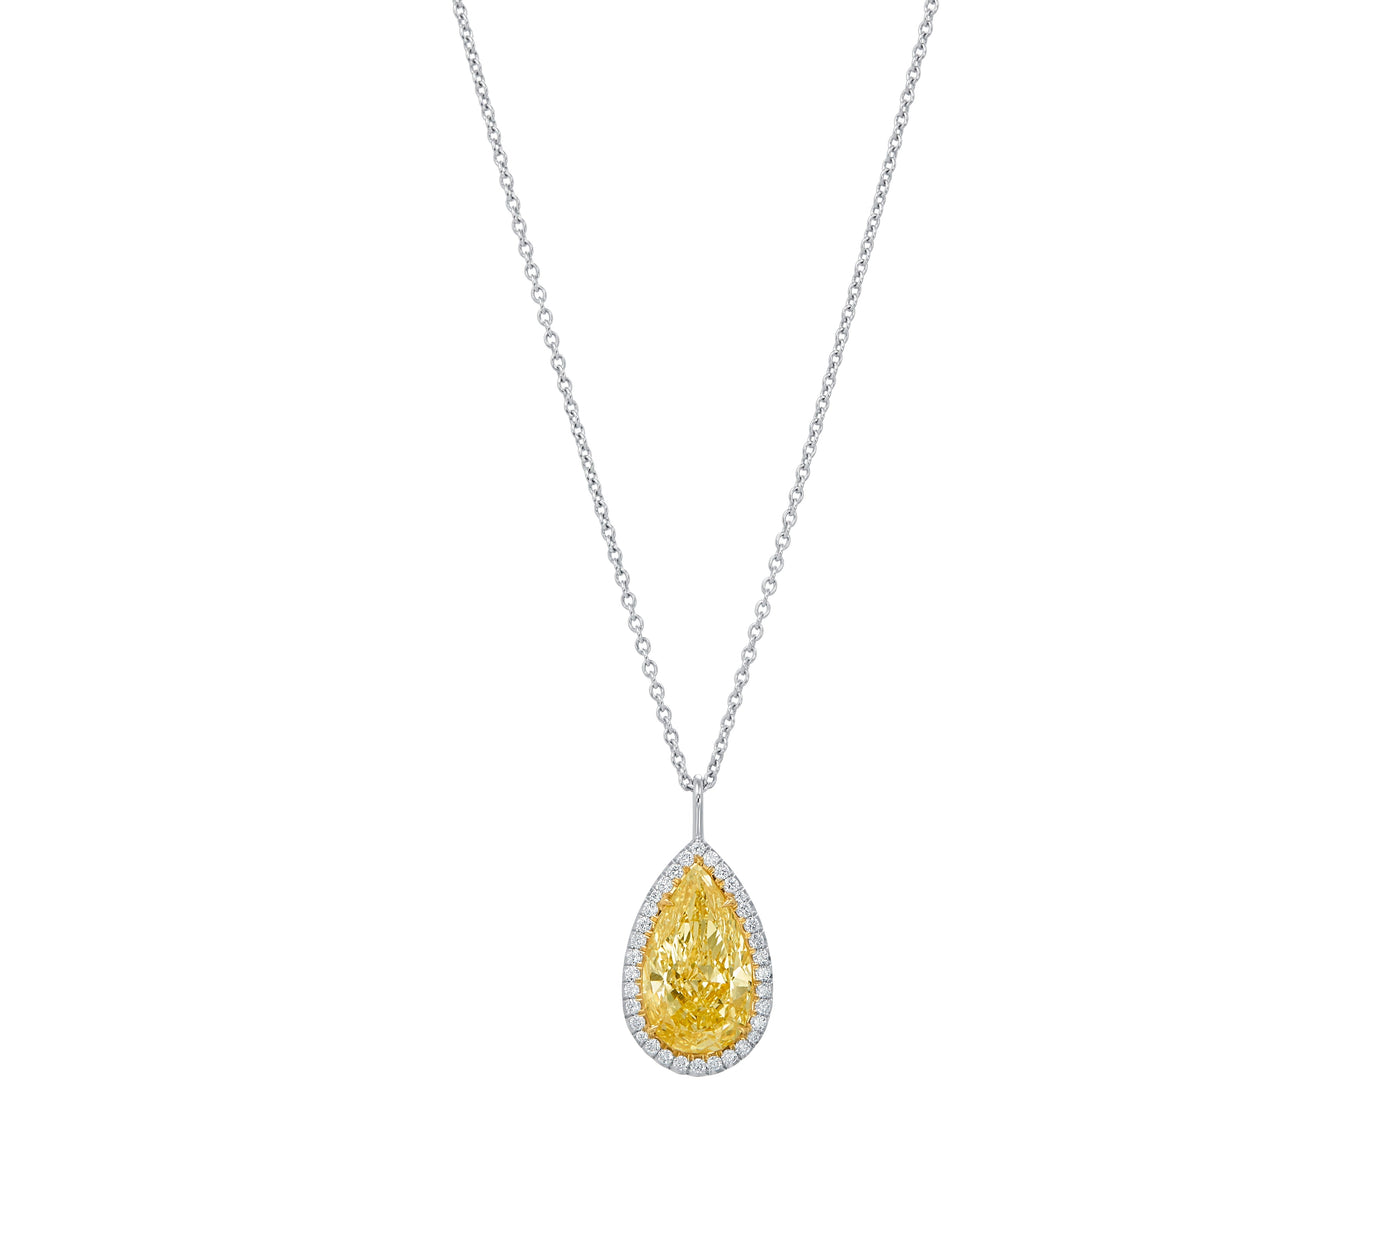 Pear Shaped Fancy Yellow Pendant On Chain